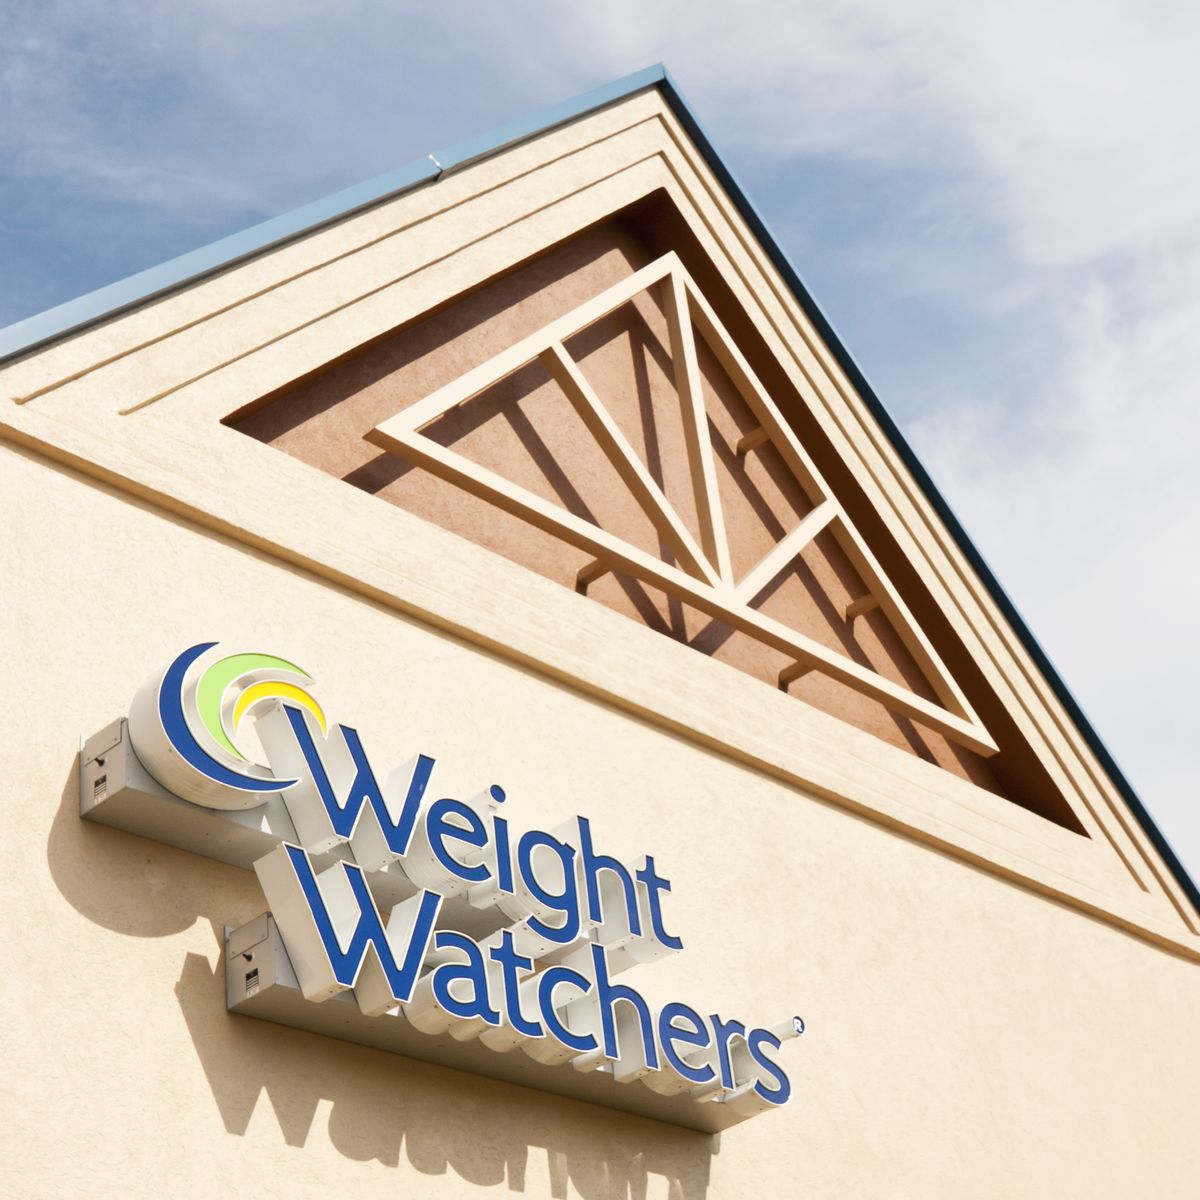 Weight Watchers rebrands to WW, social media reacts